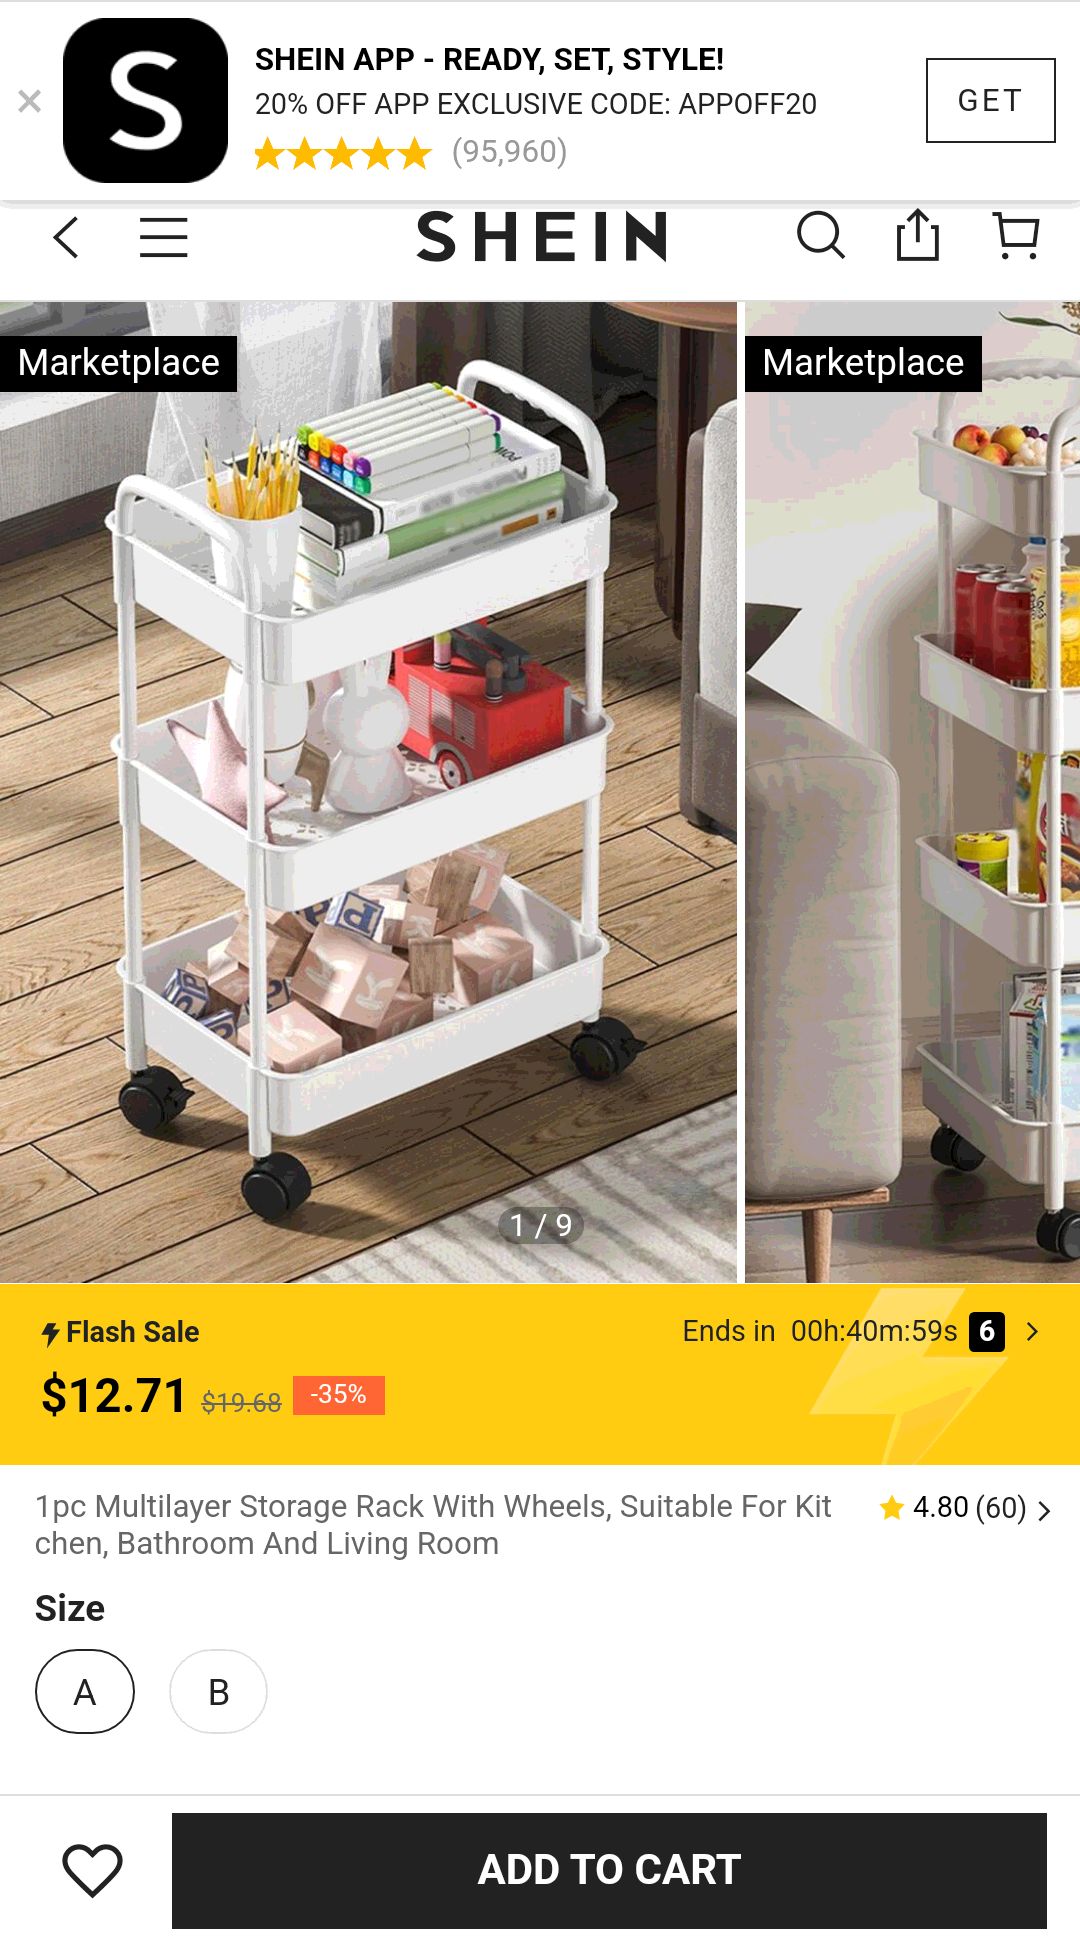 1pc Multilayer Storage Rack With Wheels, Suitable For Kitchen, Bathroom And Living Room | SHEIN USA